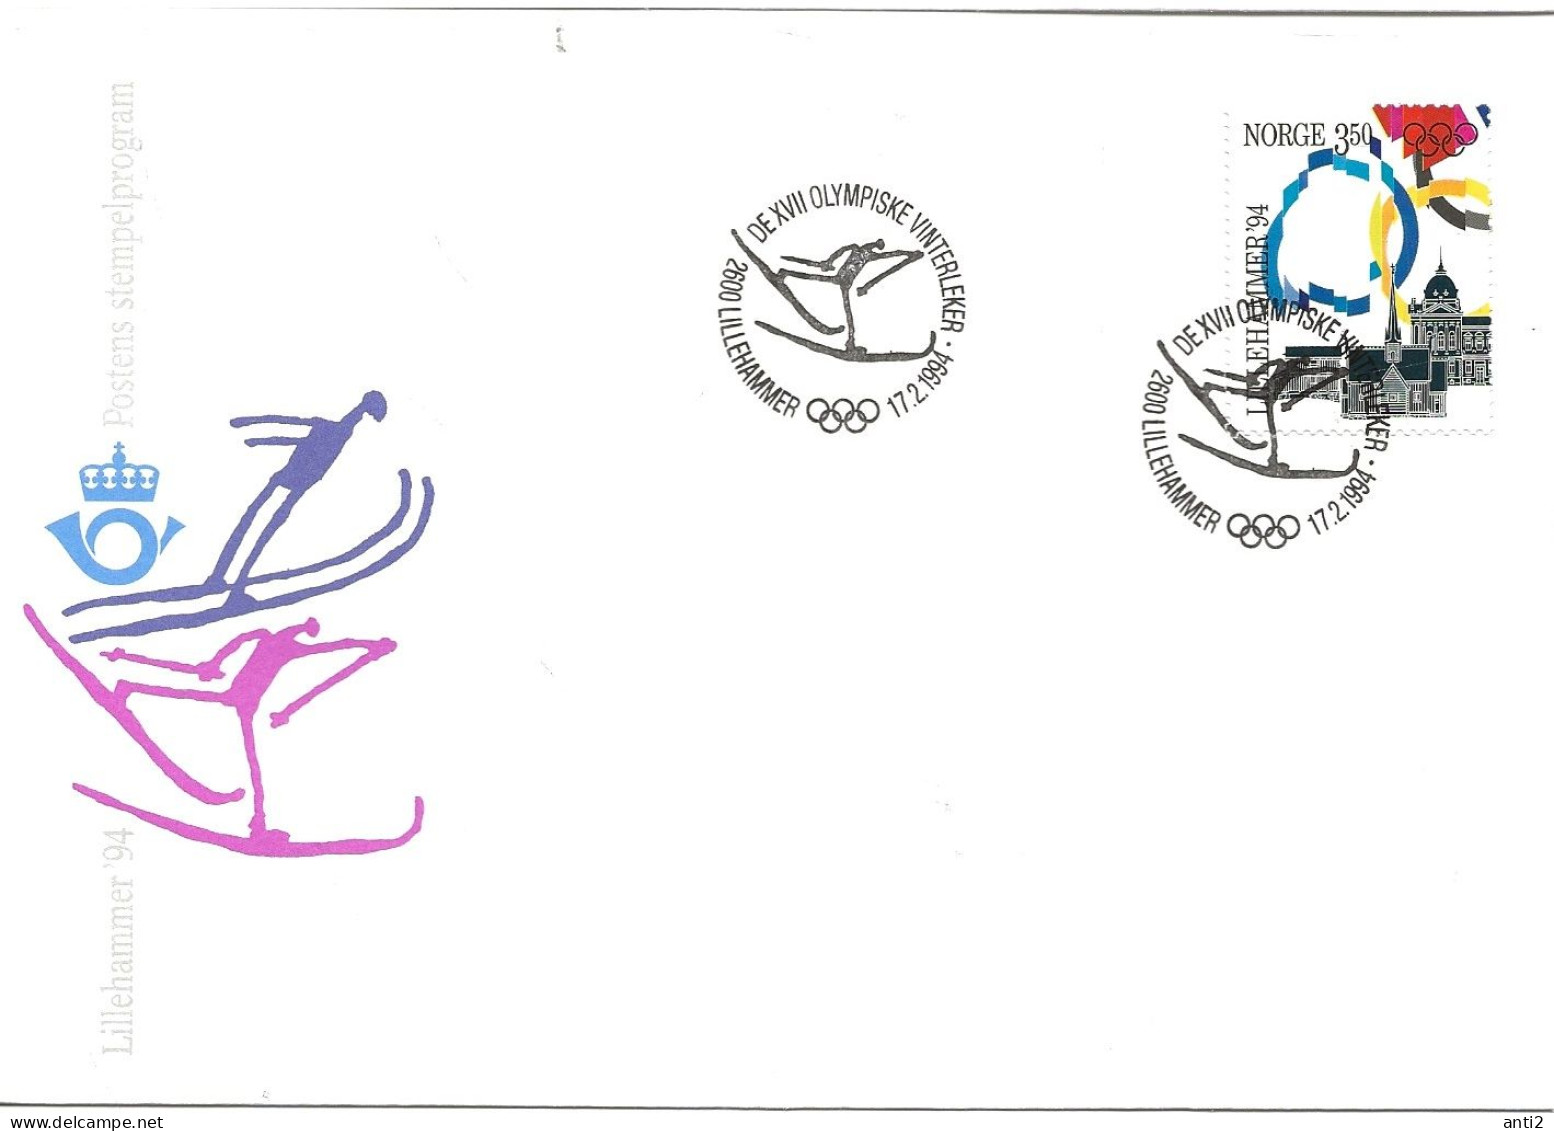 Norway Norge 1994 Winter Olympics, Lillehammer - Flags Mi 1148  Skiing Cross Country Cancelled Lillehammer 17.2.94 - Covers & Documents